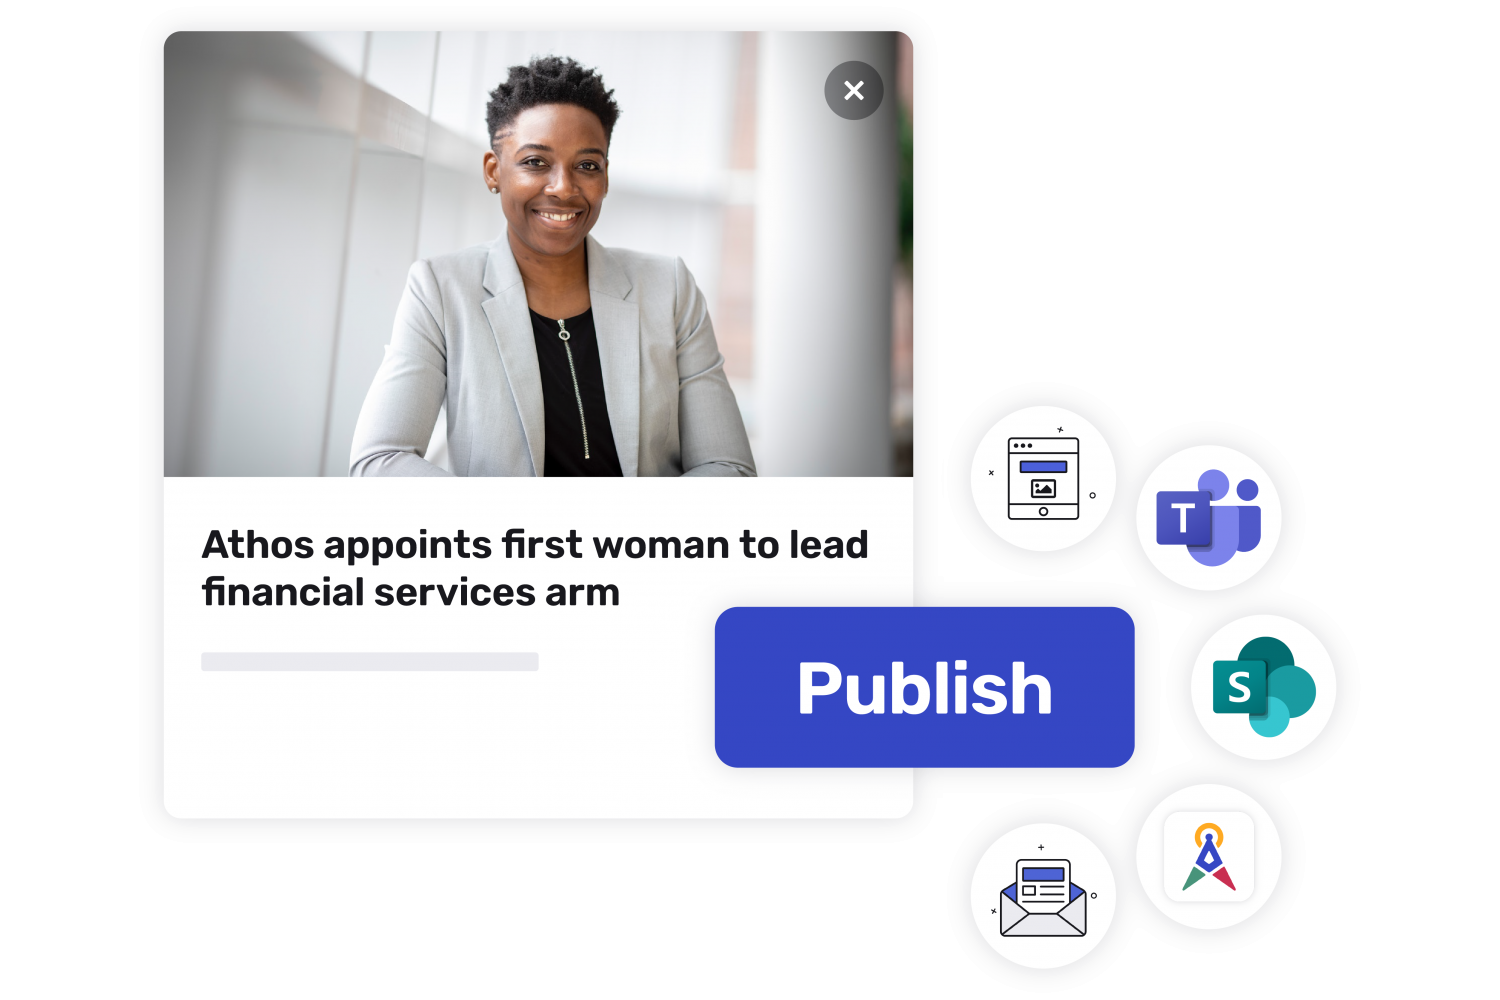 Story titled "Athos appoints first women lead to financial services arm" that's cross-published to mobile app, email, Teams, SharePoint